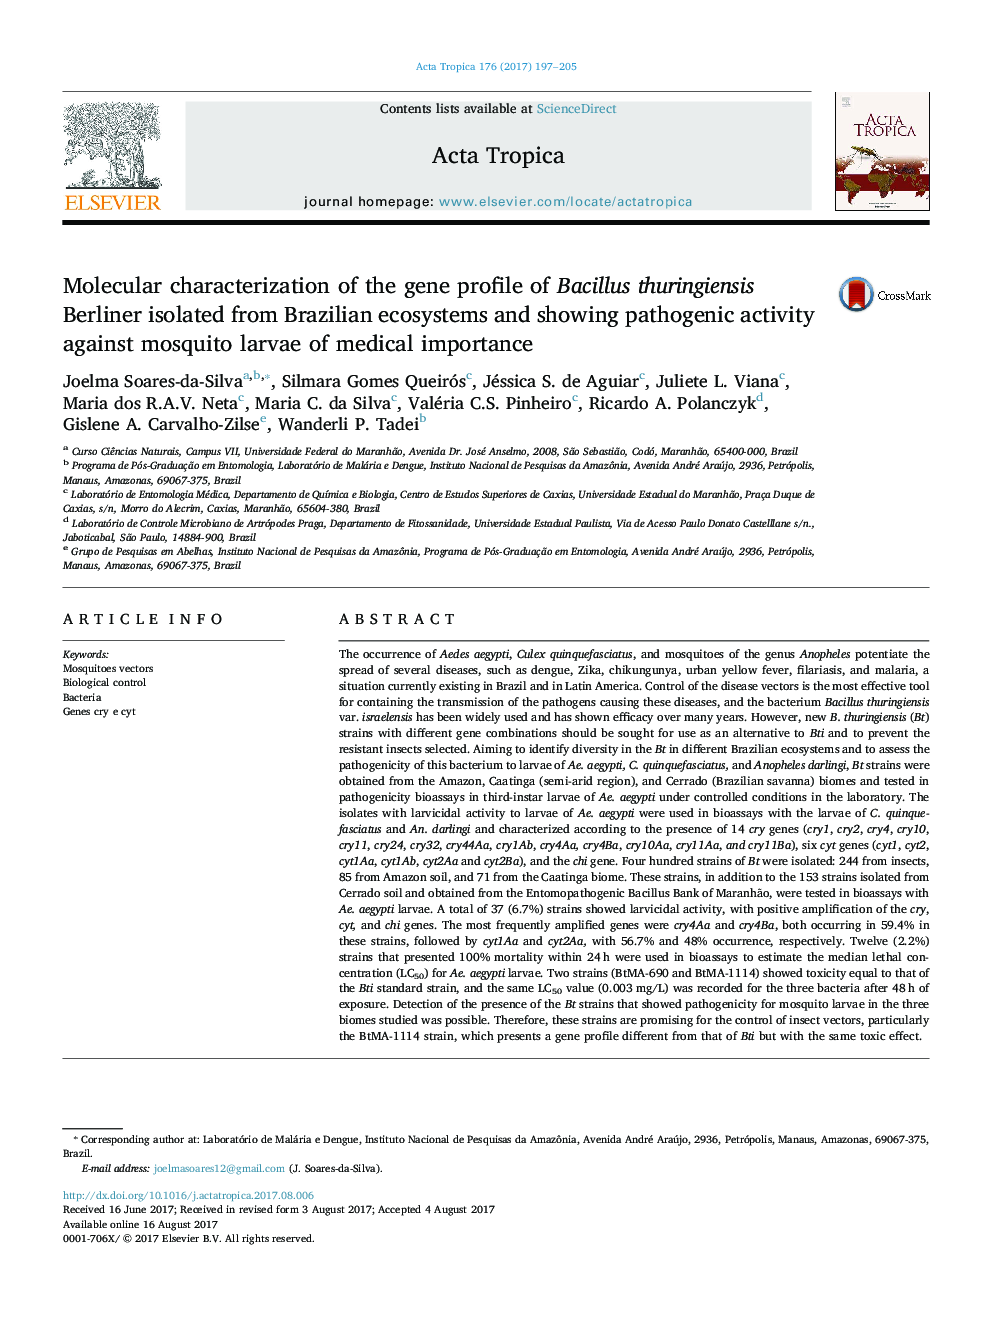 Molecular characterization of the gene profile of Bacillus thuringiensis Berliner isolated from Brazilian ecosystems and showing pathogenic activity against mosquito larvae of medical importance